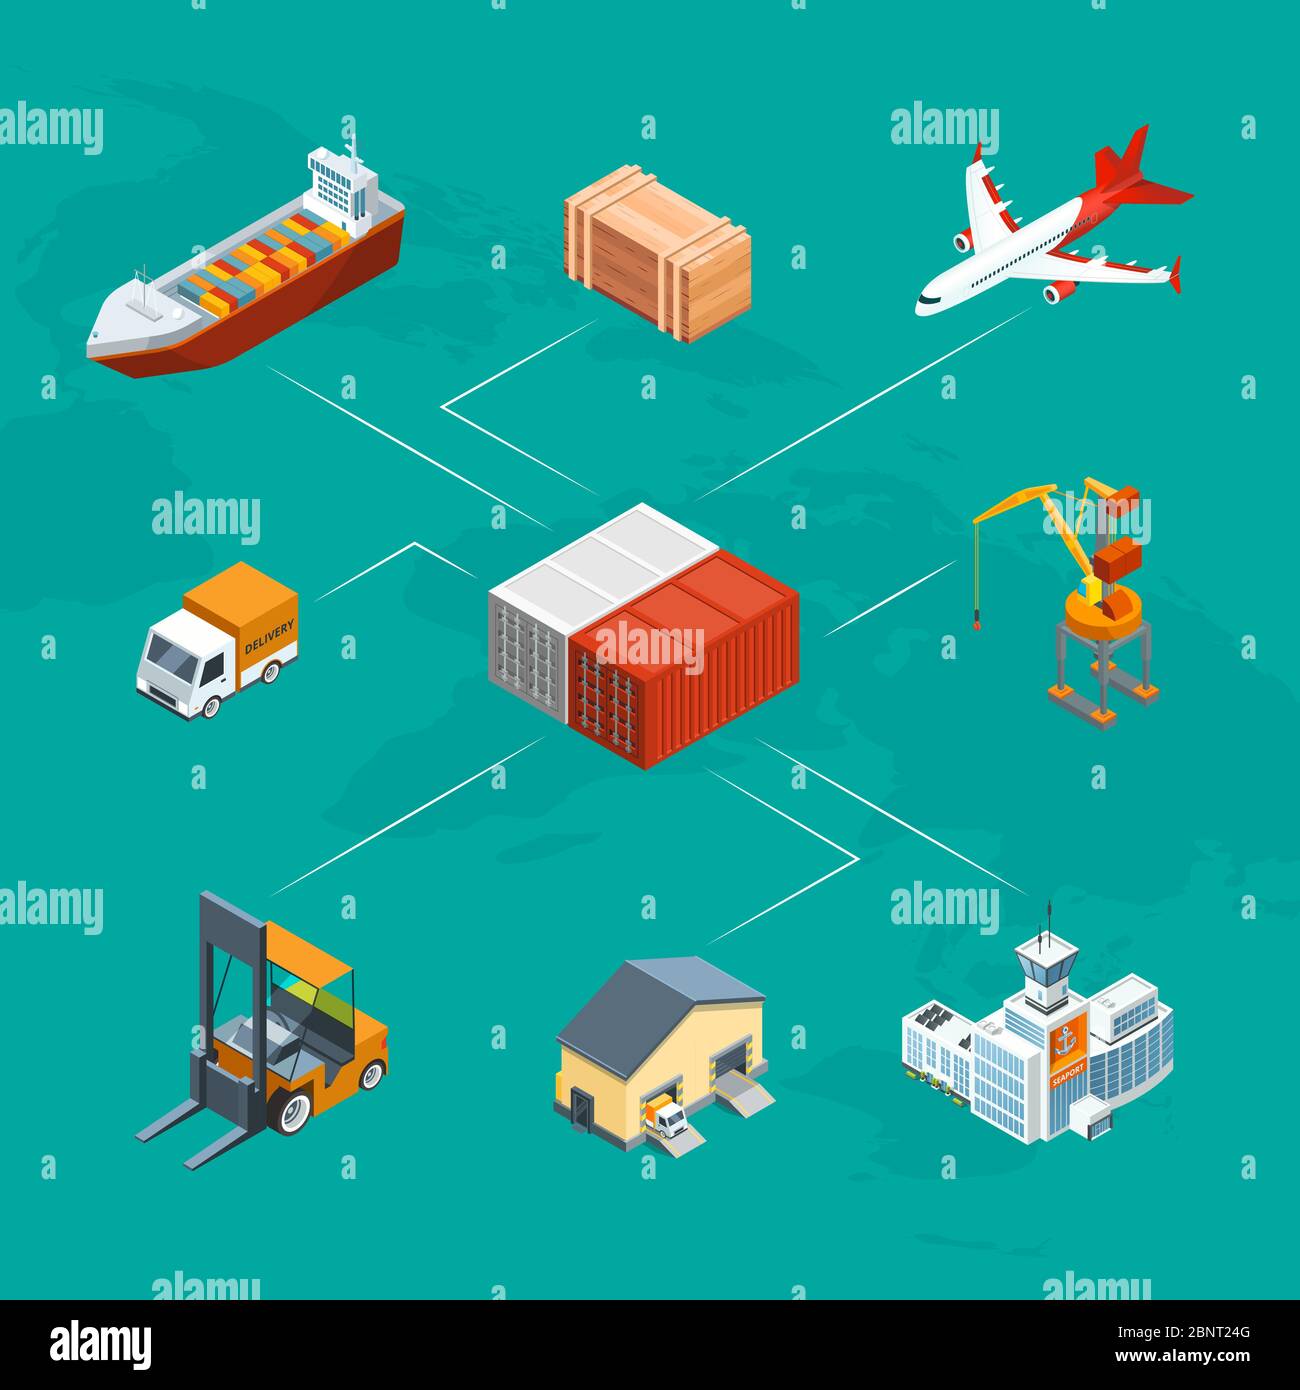 Vector isometric marine logistics and seaport infographic concept illustration Stock Vector